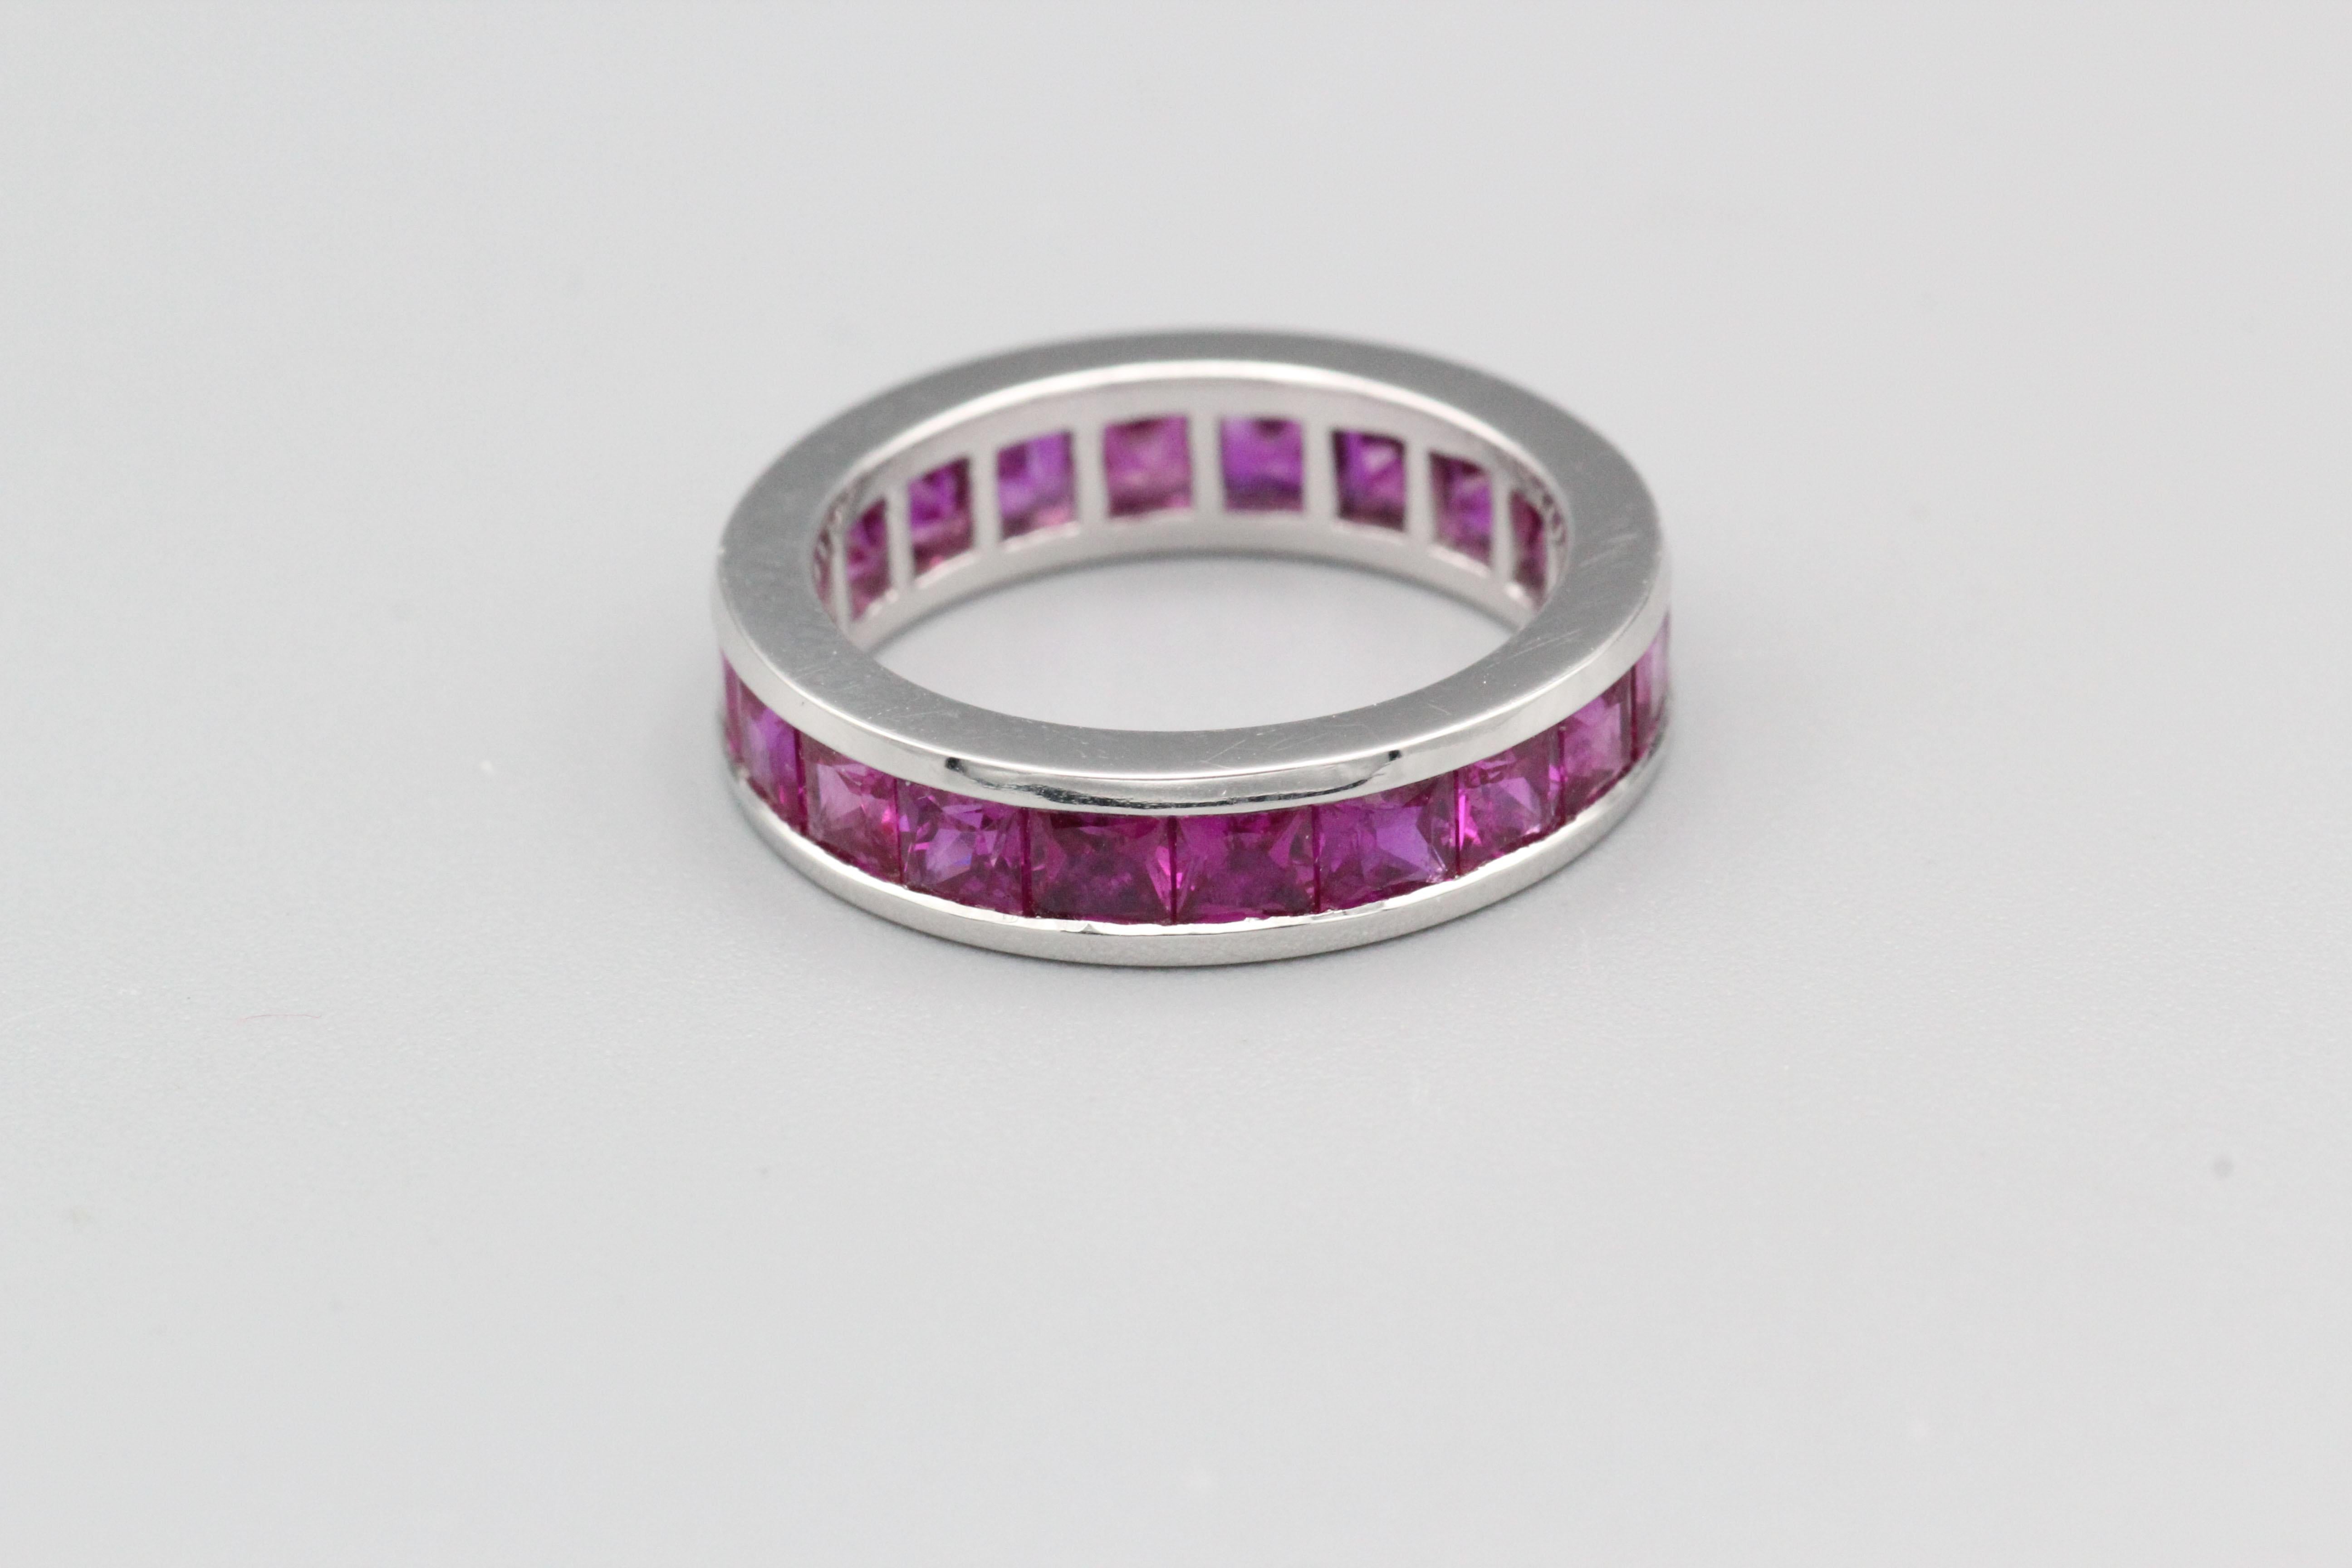 A very fine Graff princess cut ruby and platinum band.  The band is made of high-quality platinum, a durable and precious metal that is known for its strength, purity, and luster.  The band is set with a row of square shaped rubies that have been